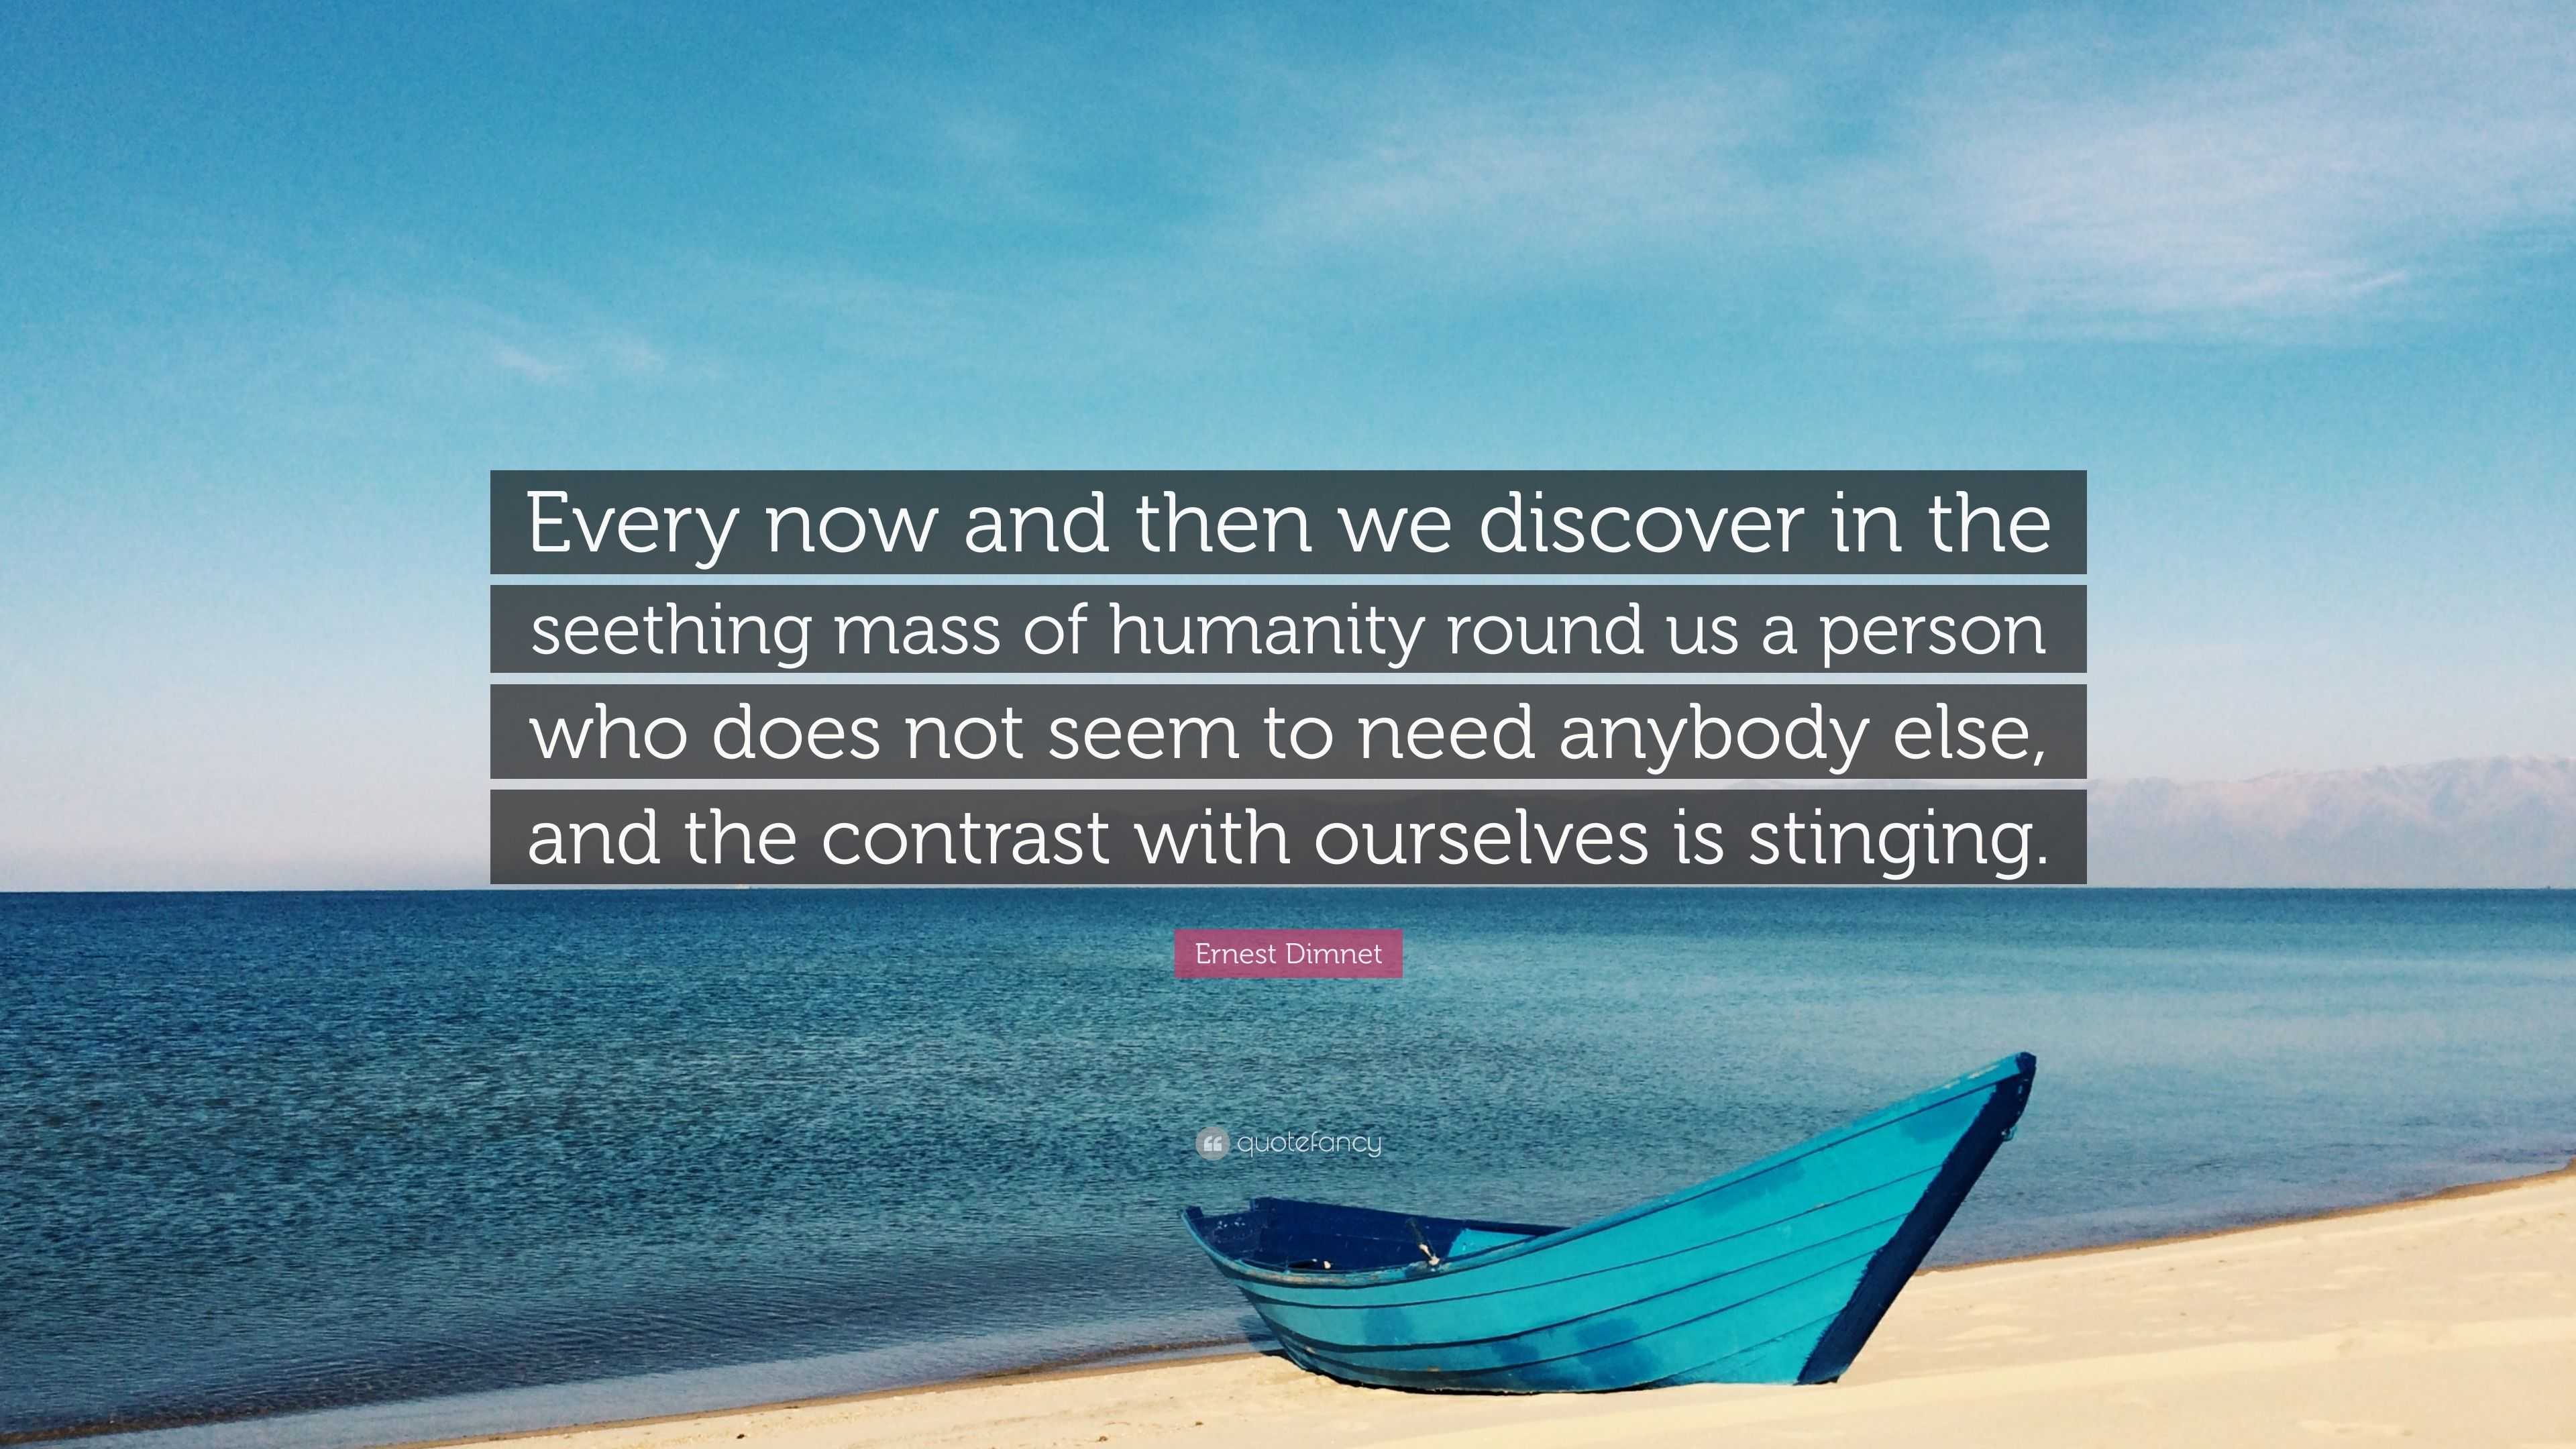 Ernest Dimnet Quote: “Every now and then we discover in the seething ...